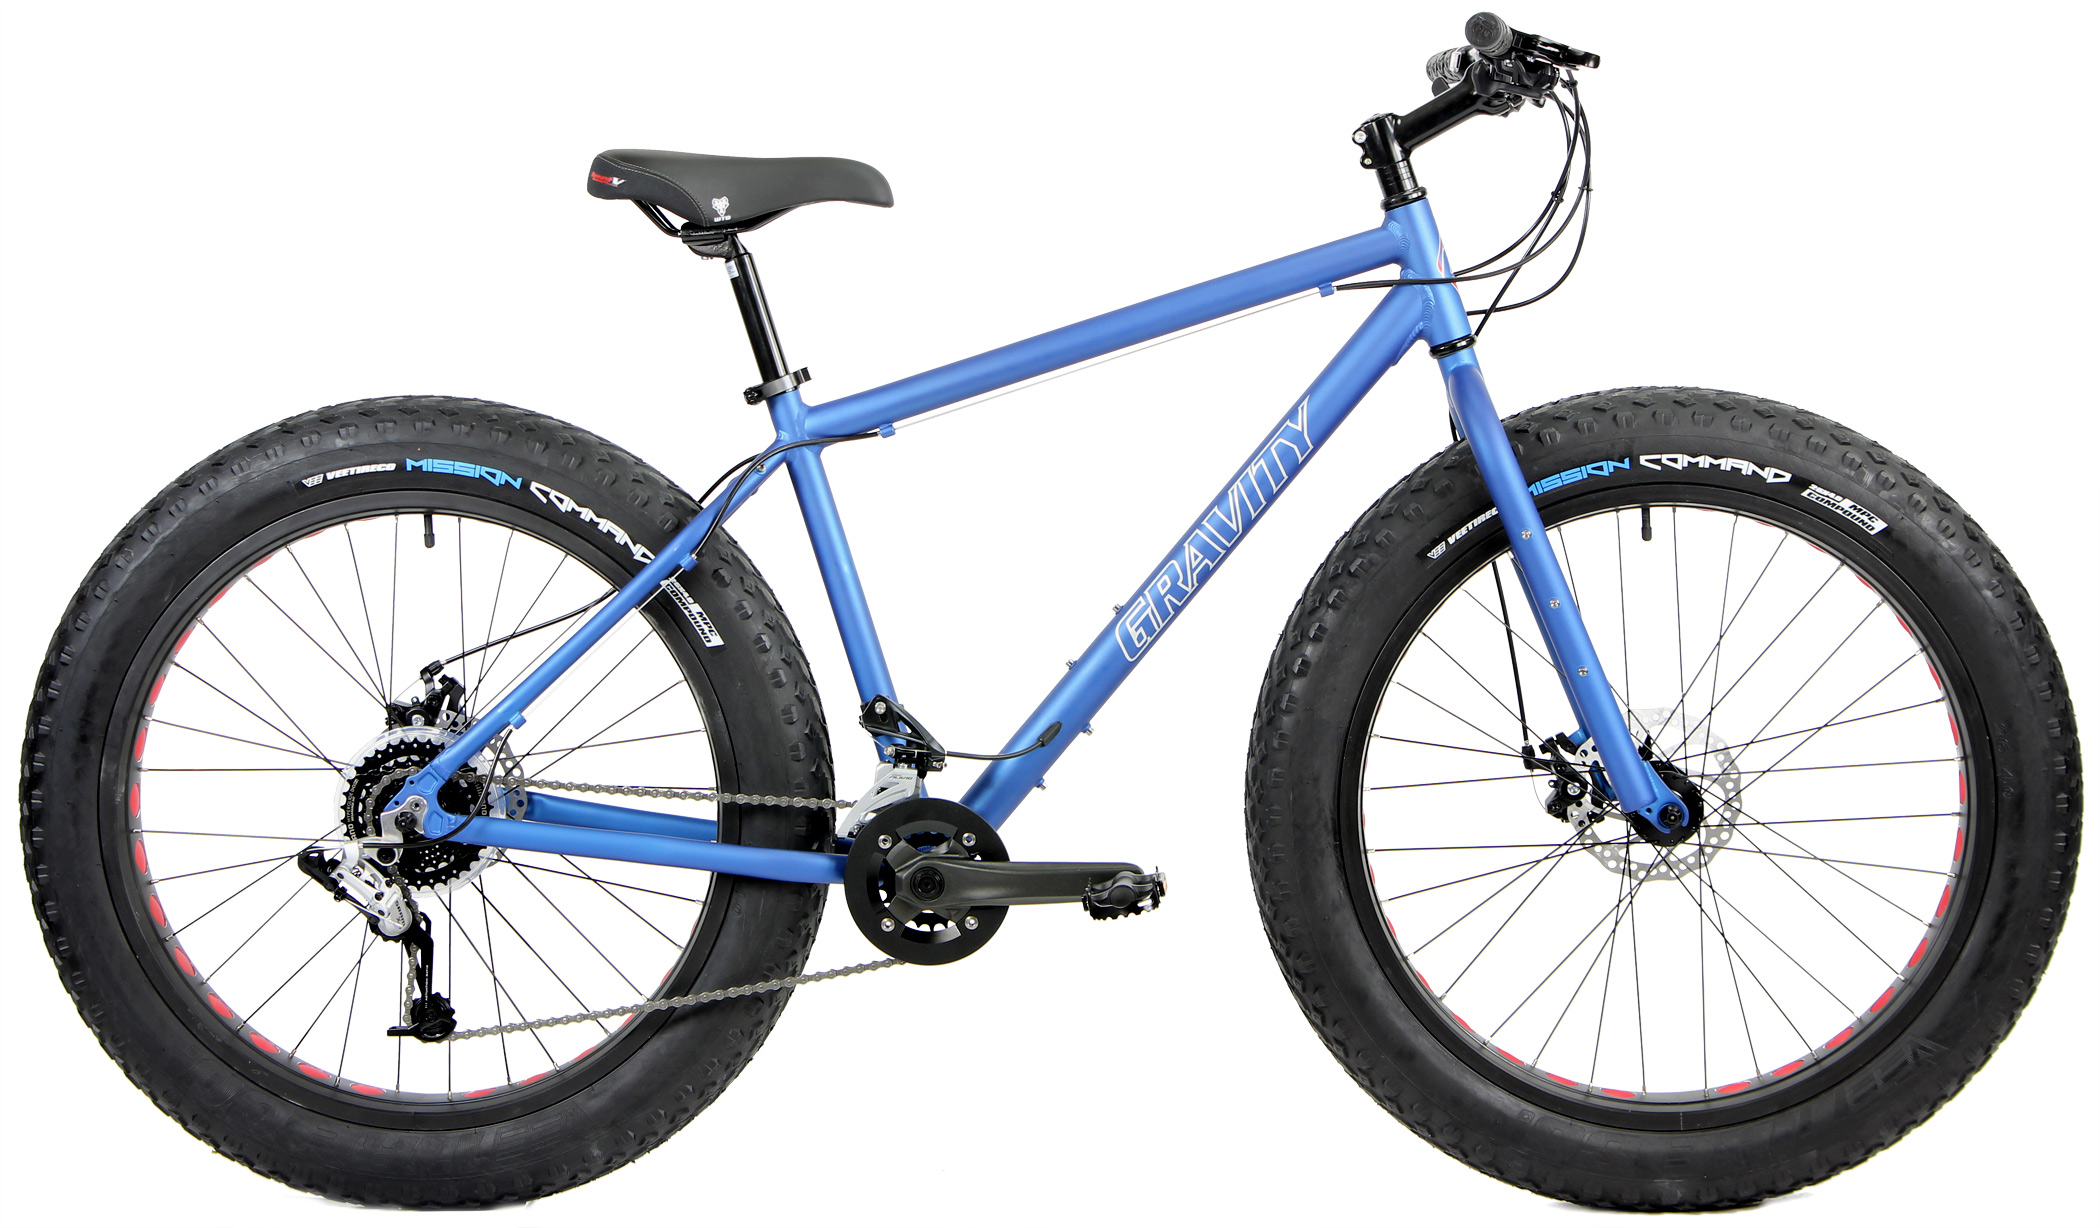 Save up to 60% off new Fat Bikes and Mountain Bikes - MTB